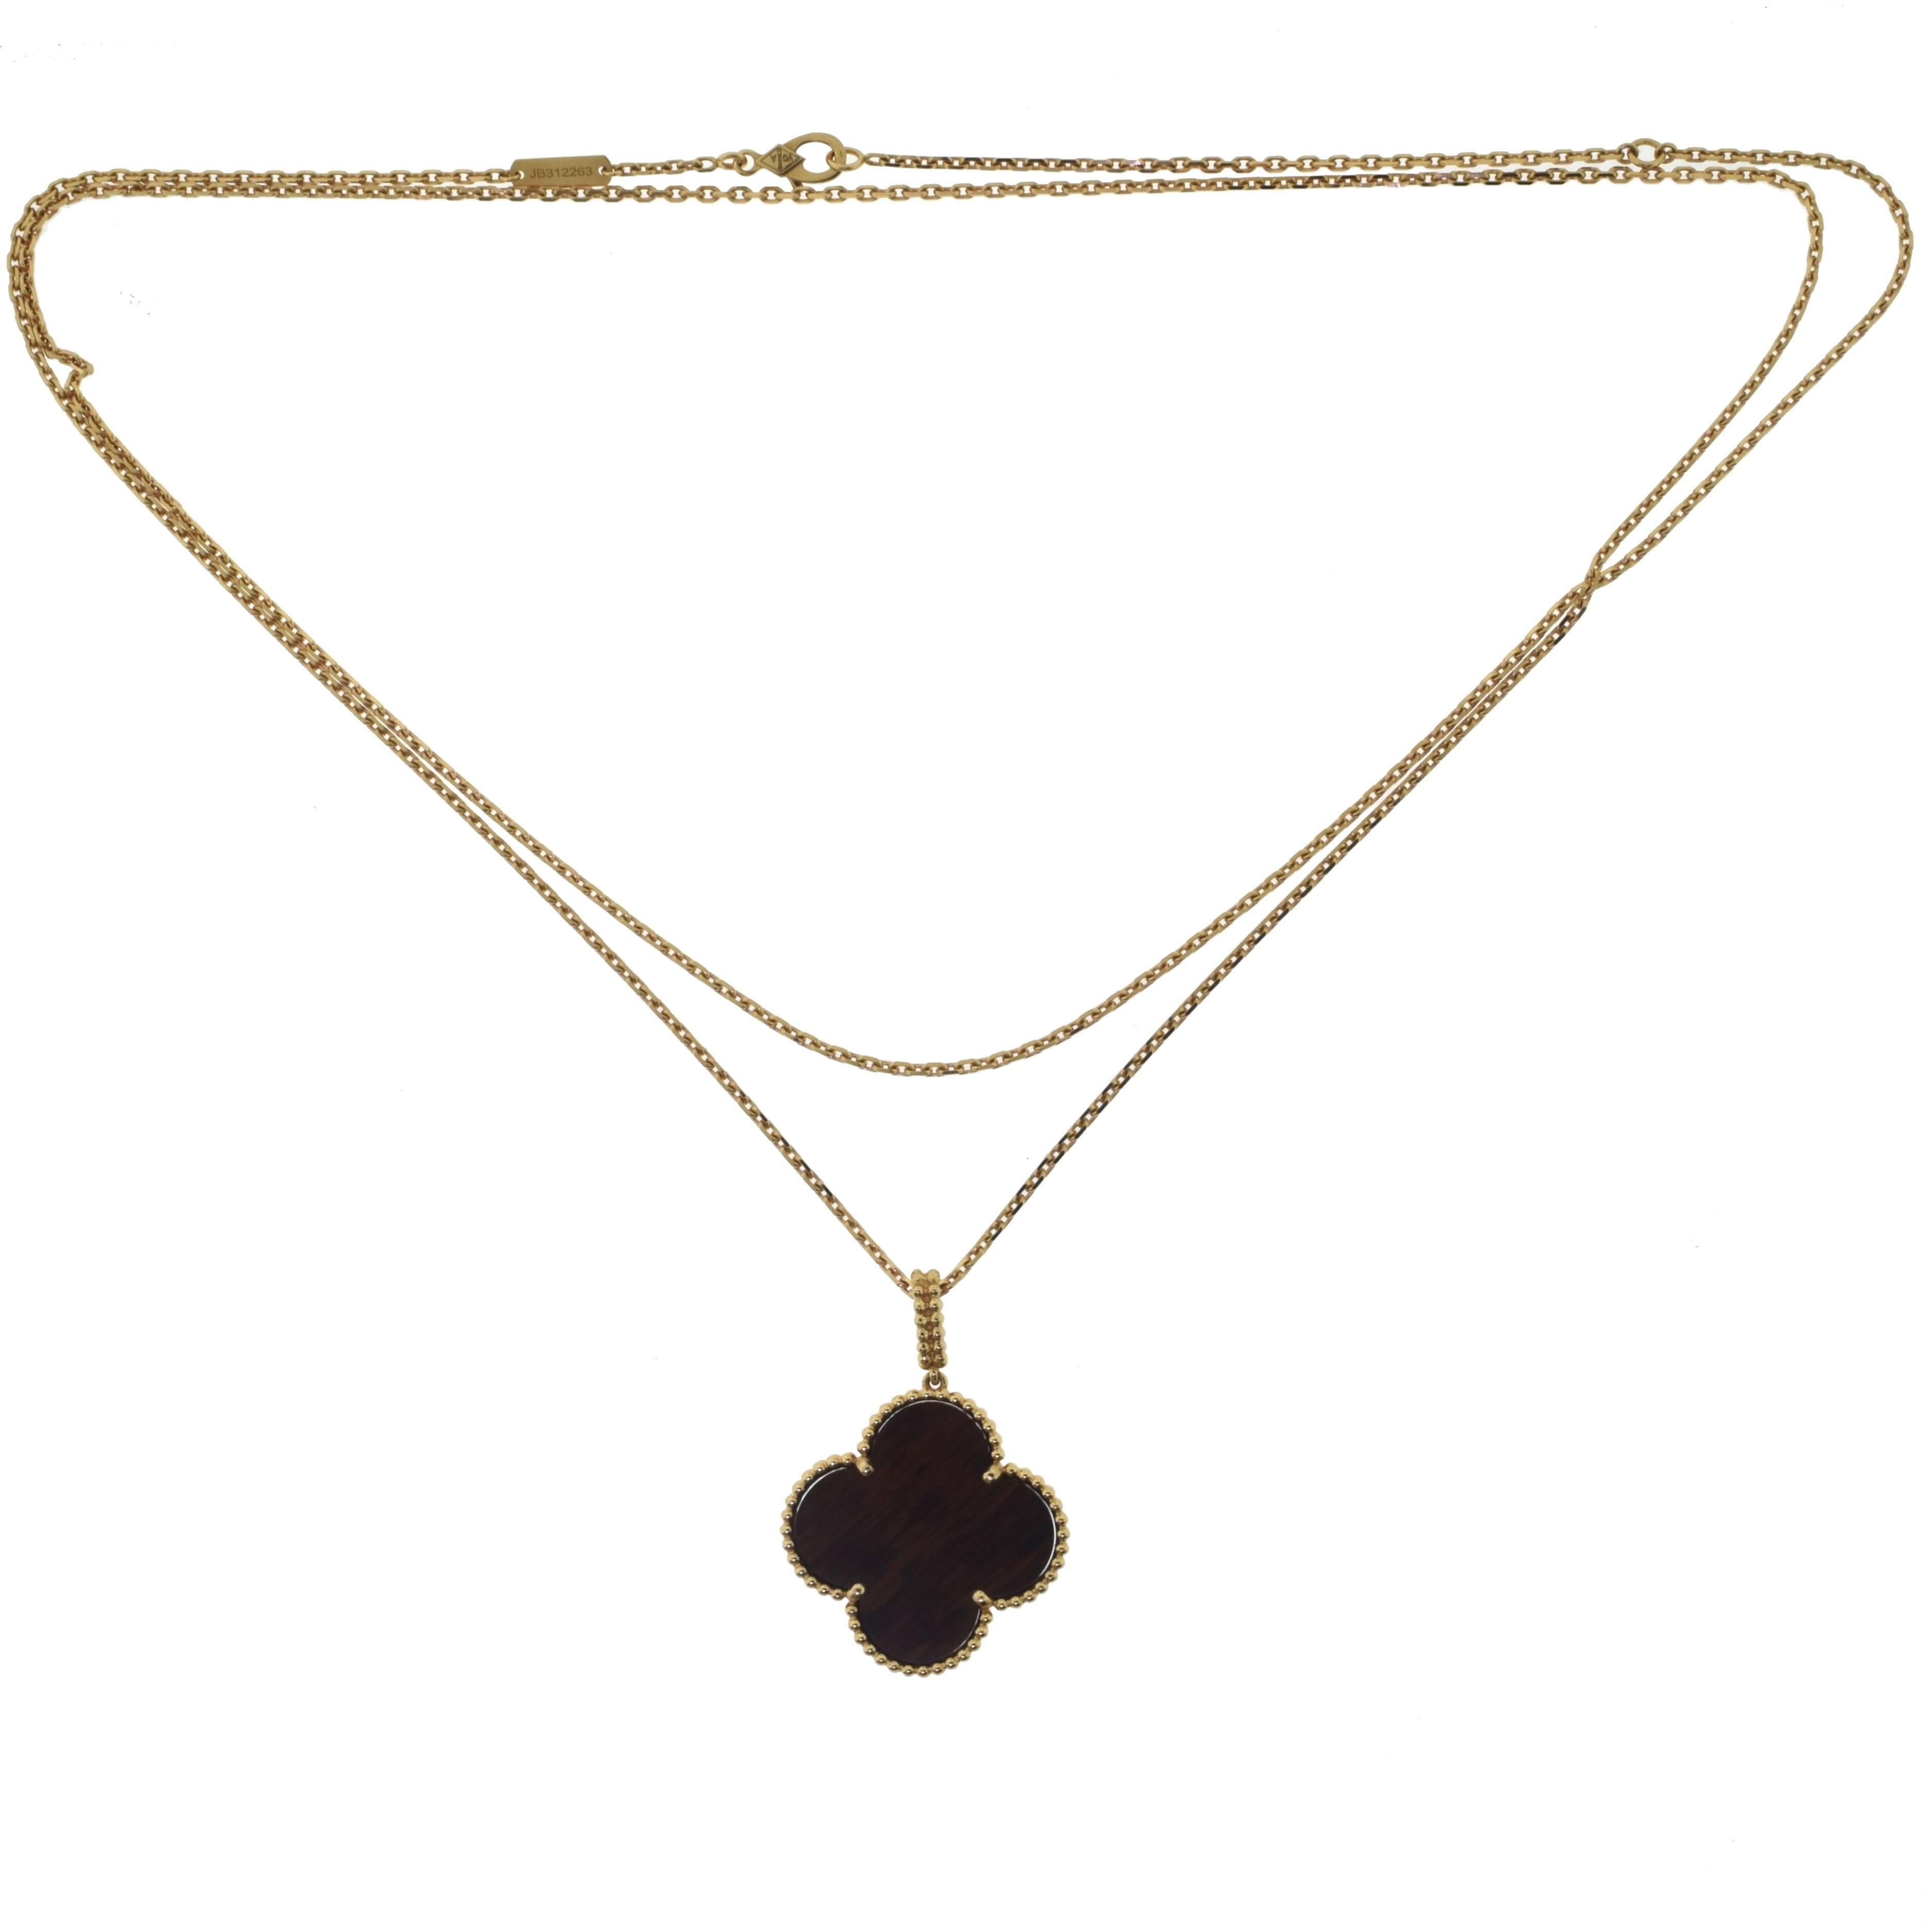 From Van Cleef & Arpel's MAGIC ALHAMBRA Collection:

Type: Long Necklace, 1 Motif
Metal: Pink Gold
Metal Purity: 18k 
Stone: Bois d'Amourette
Chain Length: 30.5 inches (adjustable to 34 inches)
Total Item Weight: 14.4 grams
Motif Dimension: 1